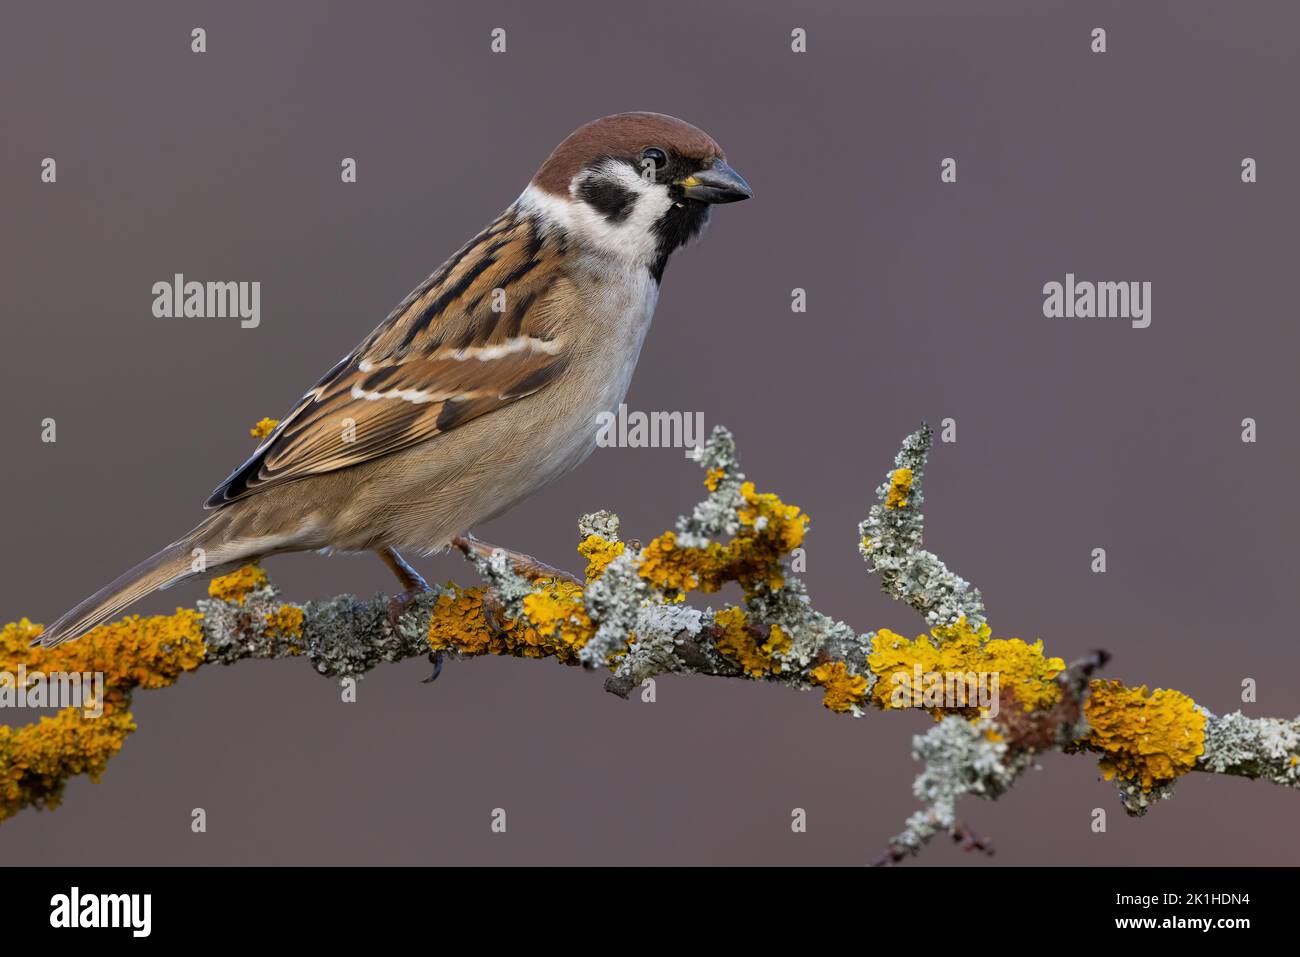 Eurasian tree sparrow sitting on branch covered in moss and lichen Stock Photo